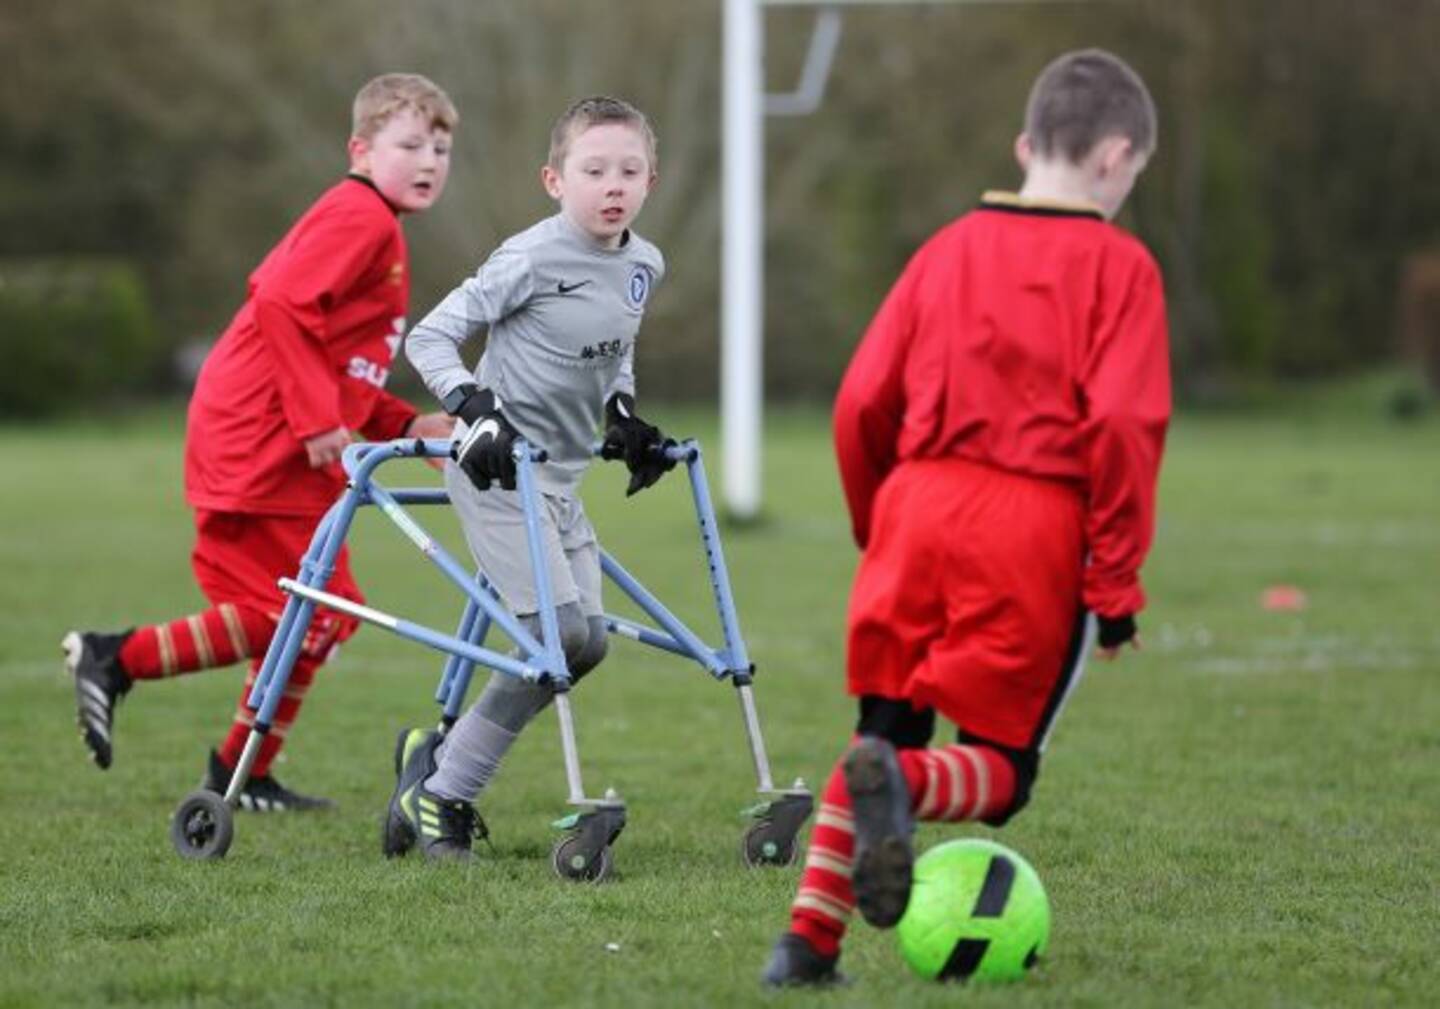 Three boys playing in a football match, one player is using a frame walker.